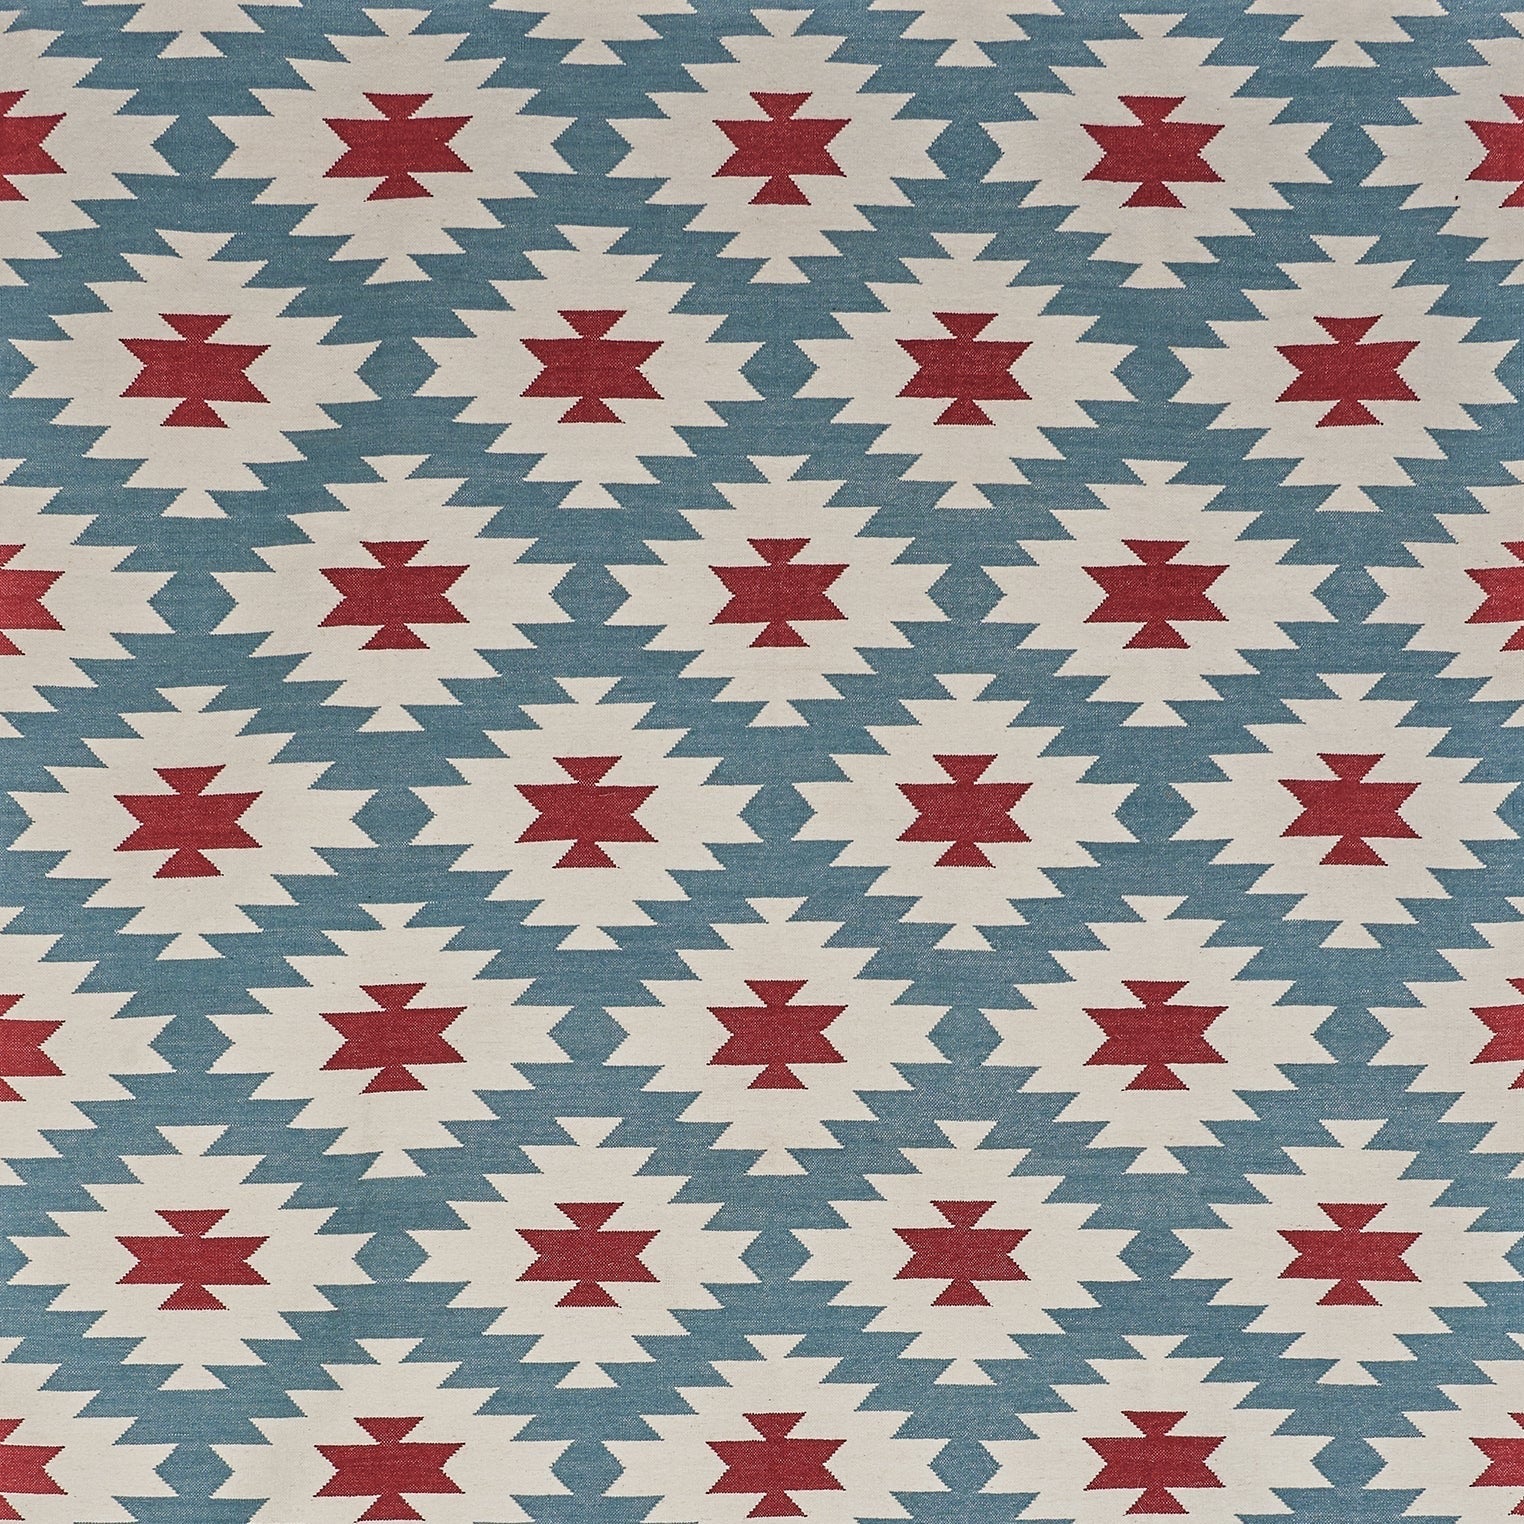 Blue and Red Diamond Rug